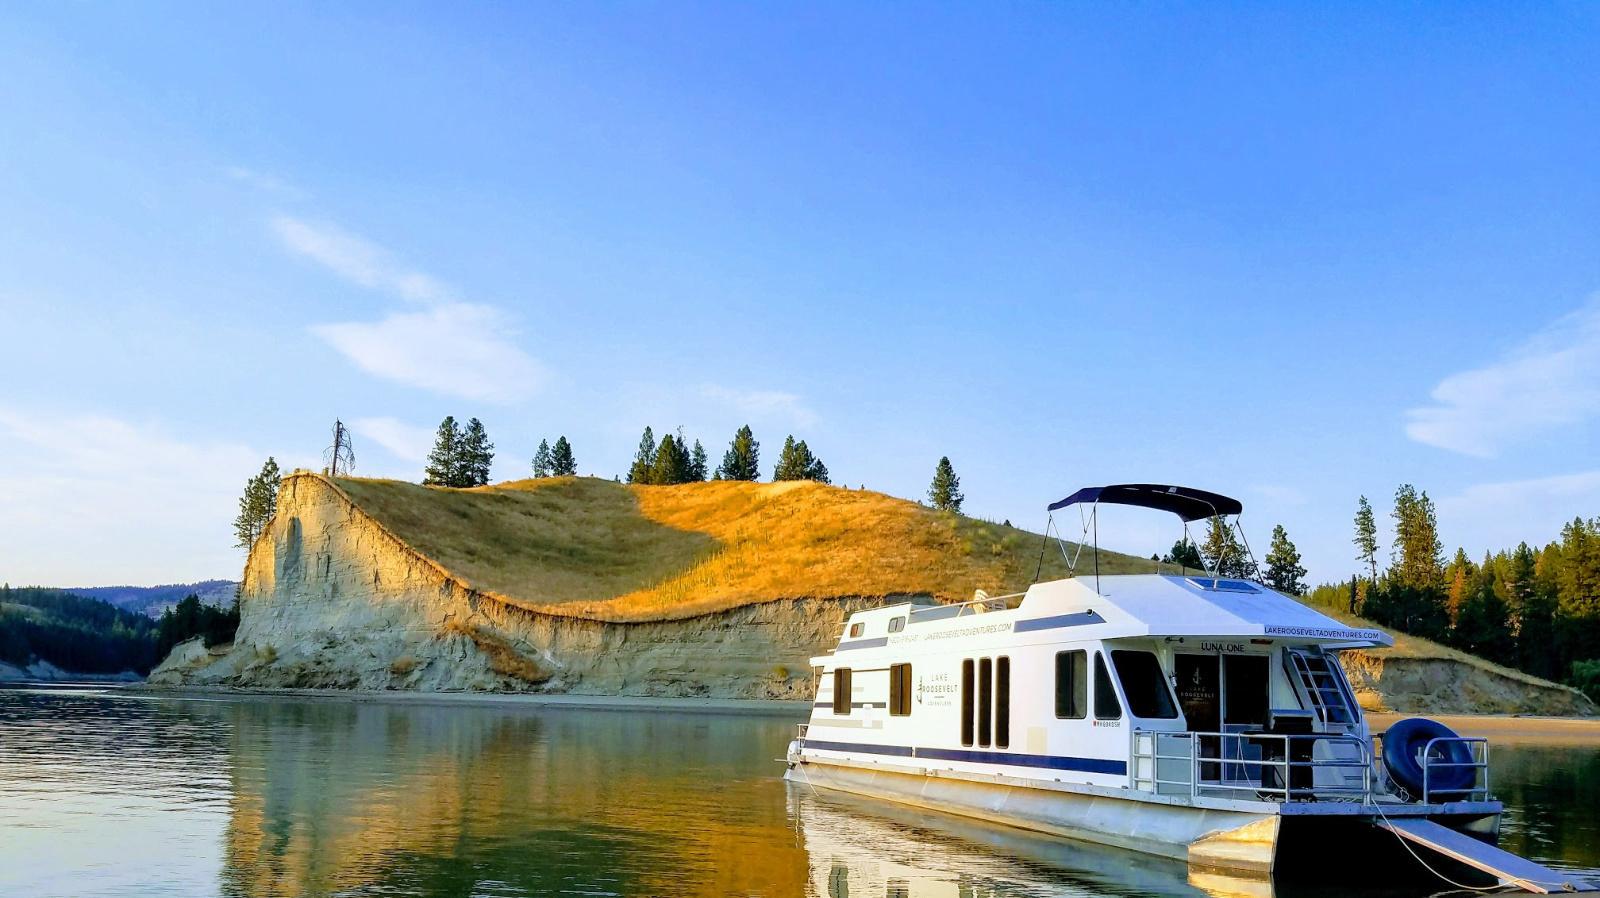 The Luna Houseboat from Seven Bays Marina